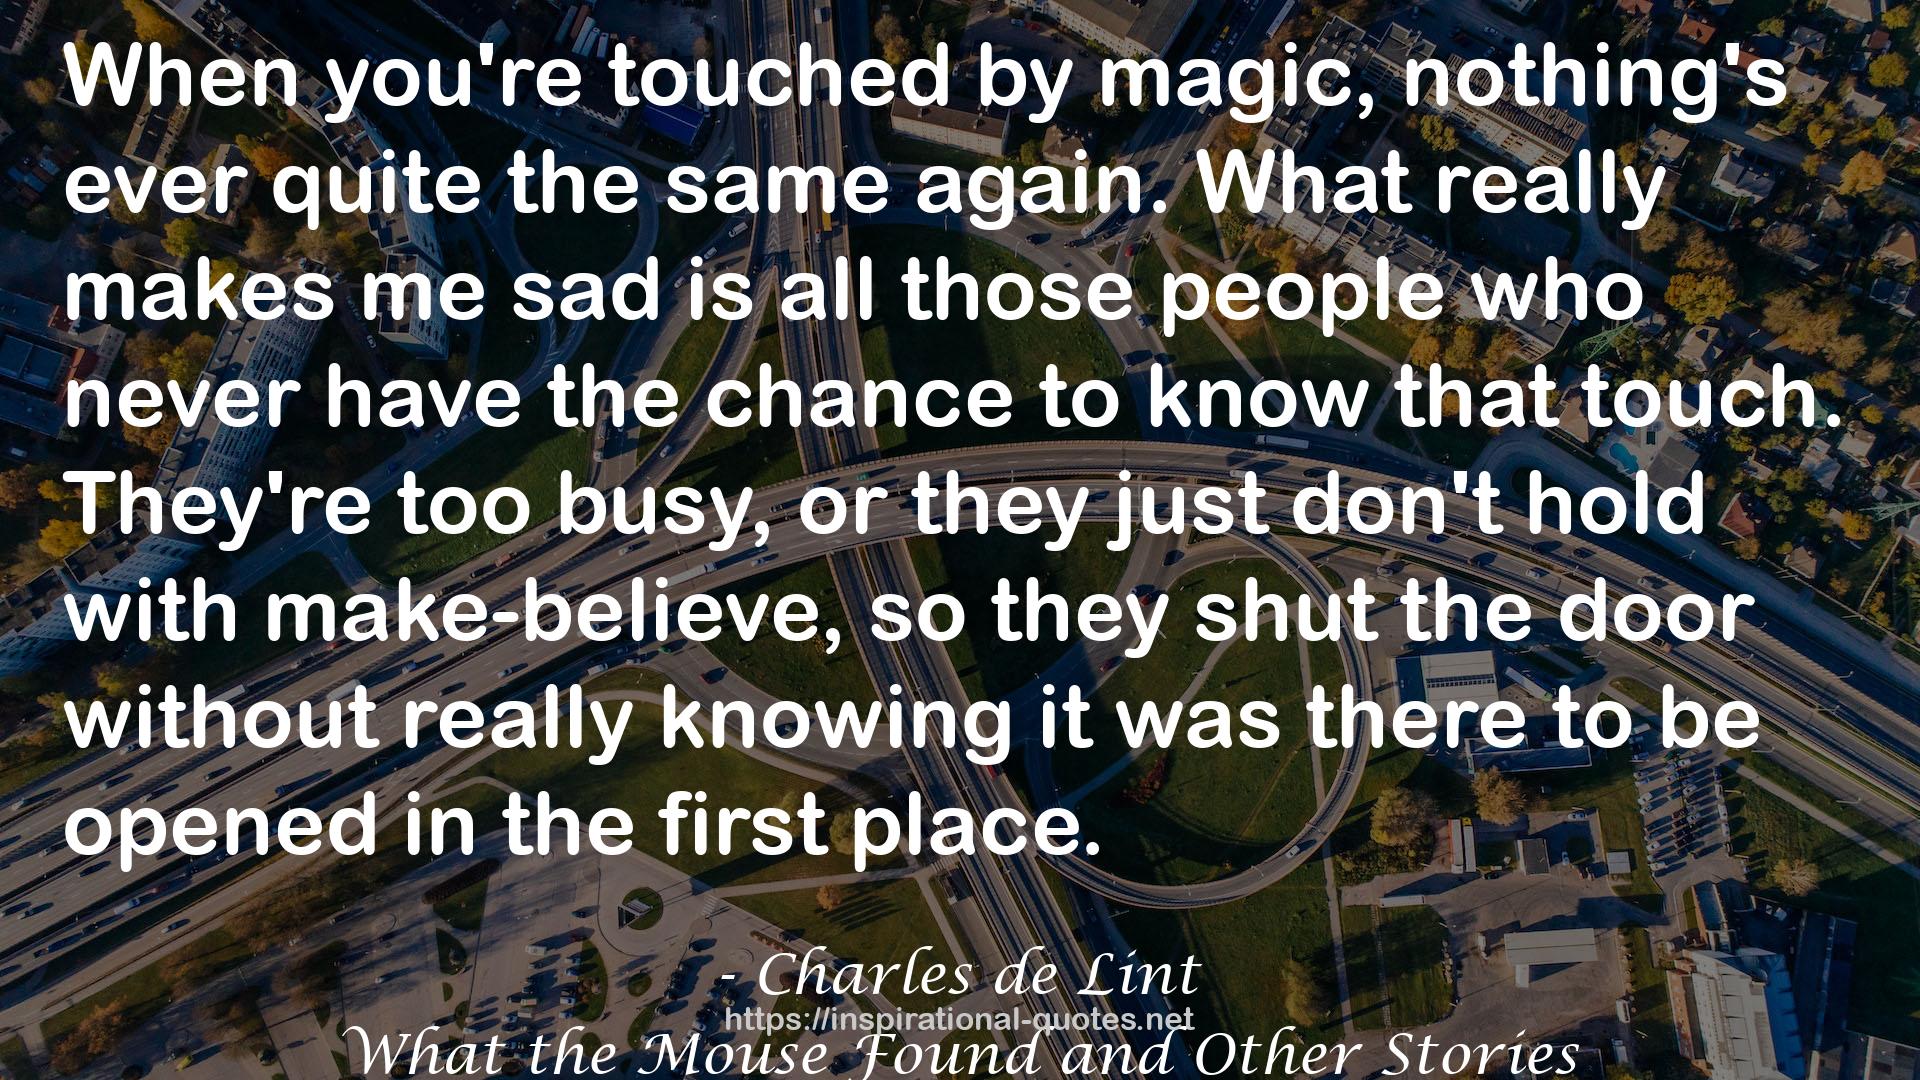 What the Mouse Found and Other Stories QUOTES